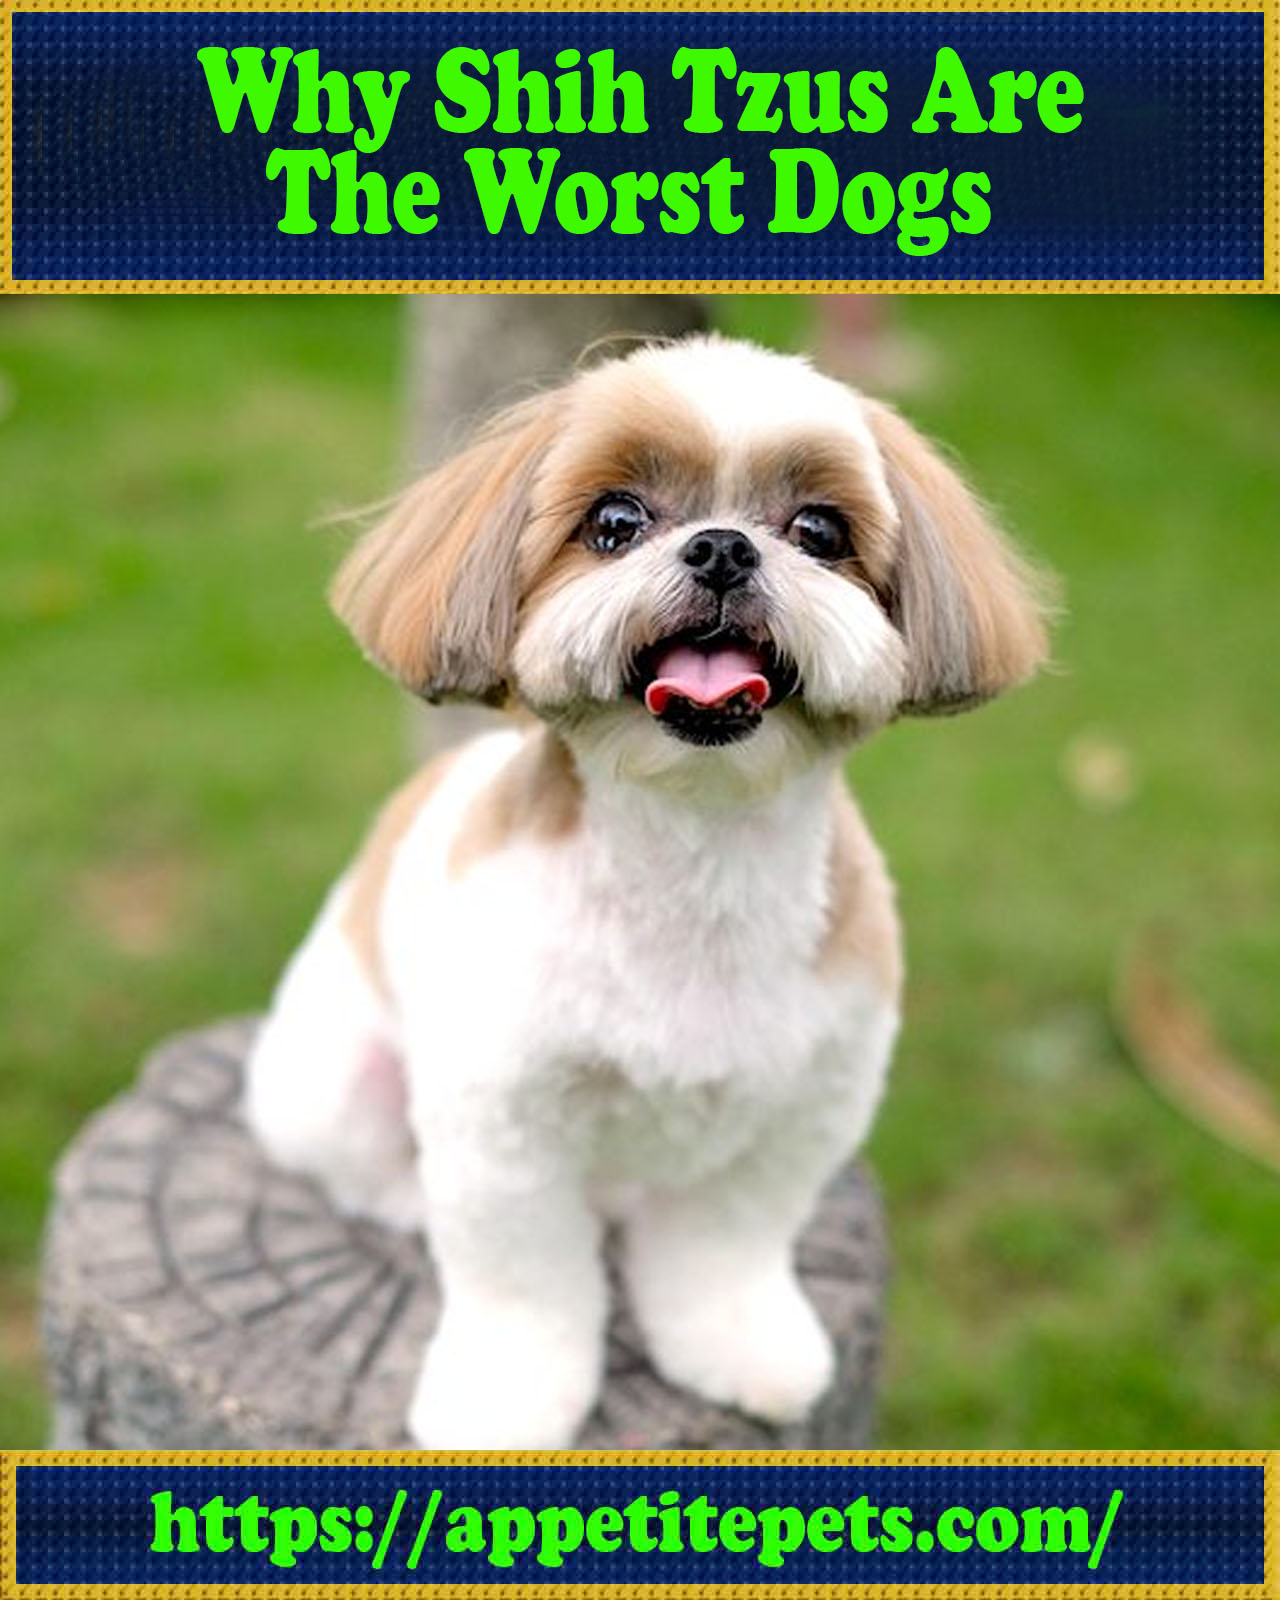 Why Shih Tzus Are the Worst Dogs